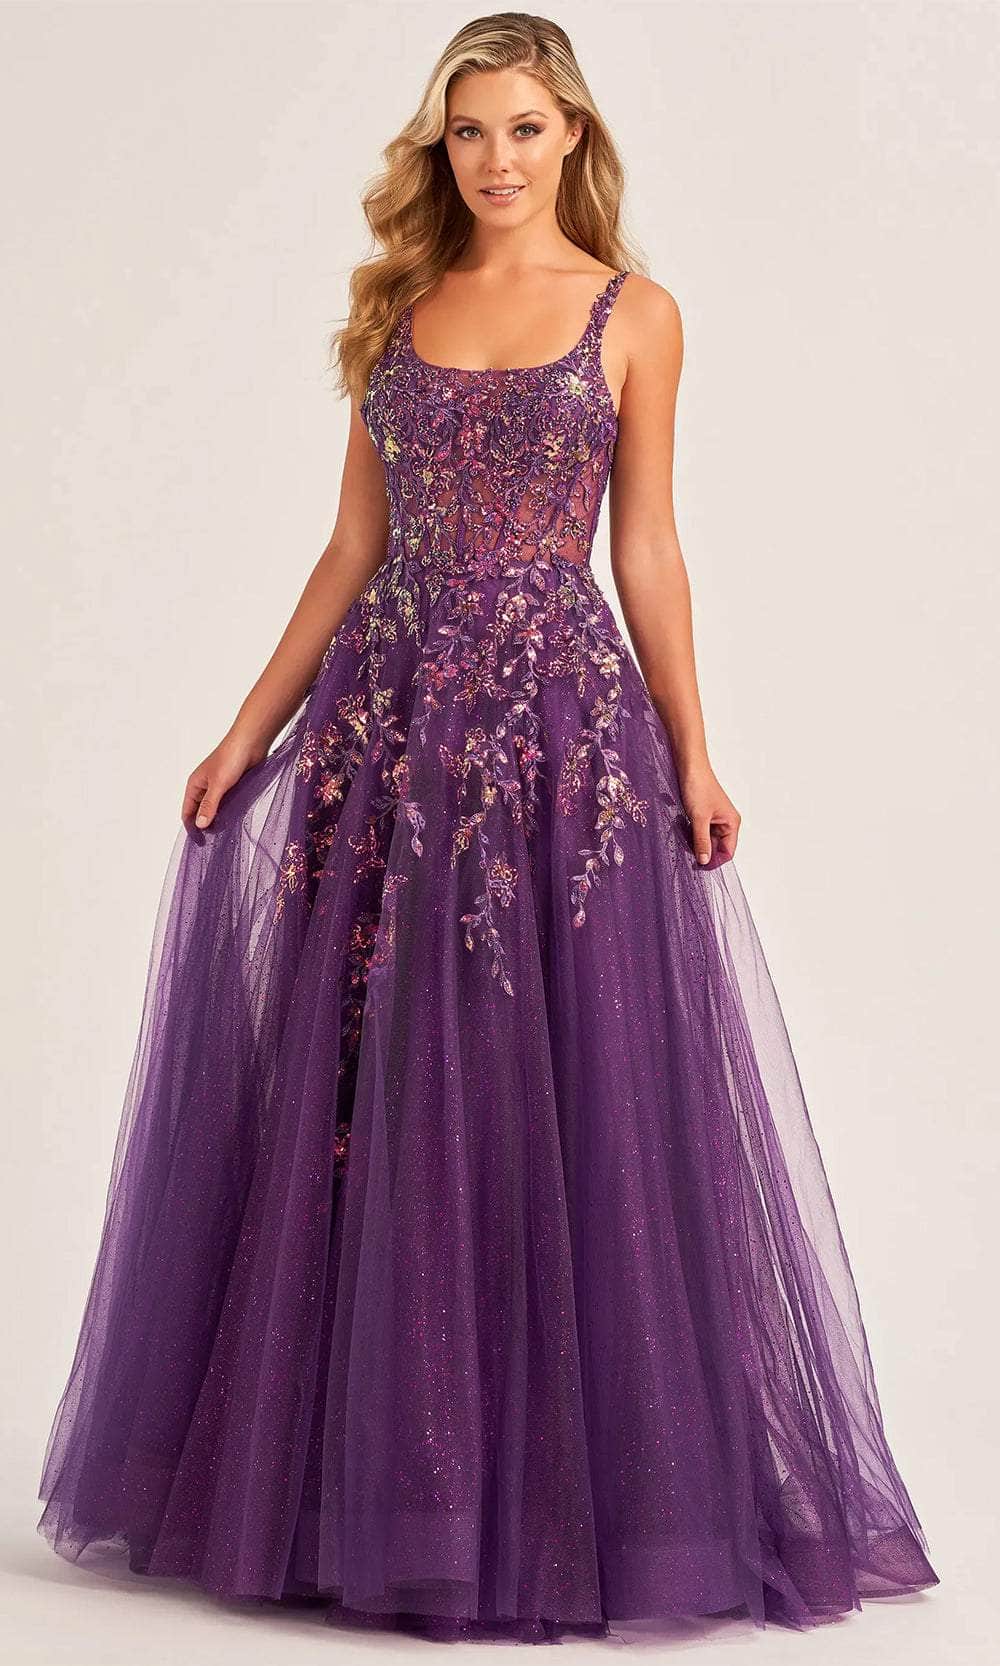 Image of Ellie Wilde EW35242 - Embroidered Sleeveless A-Line Prom Gown